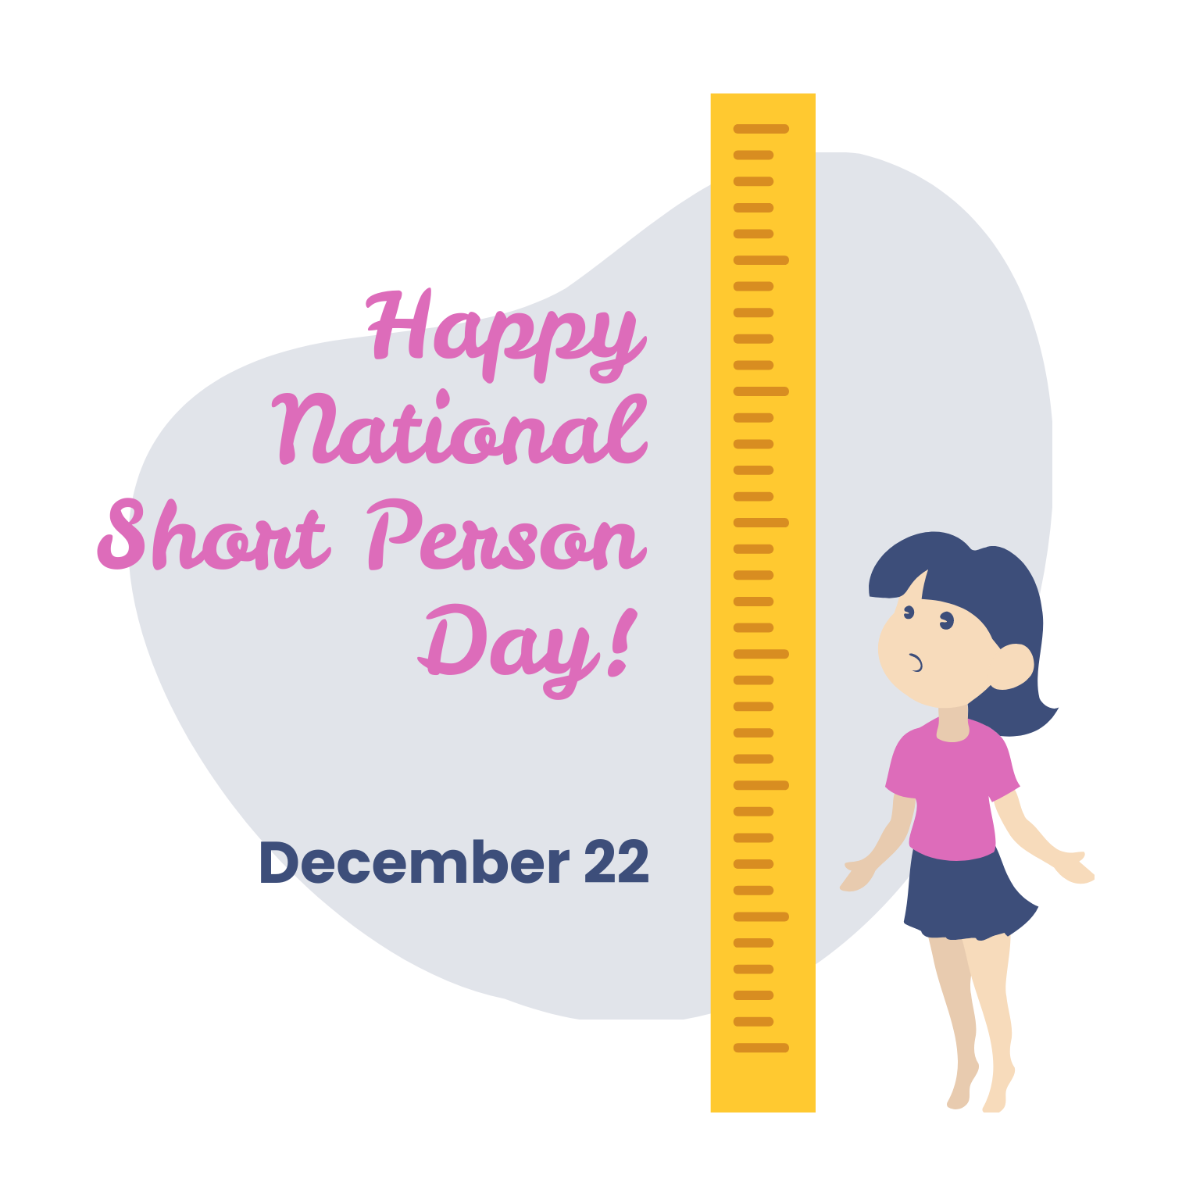 National Short Person Day Flyer Vector Template